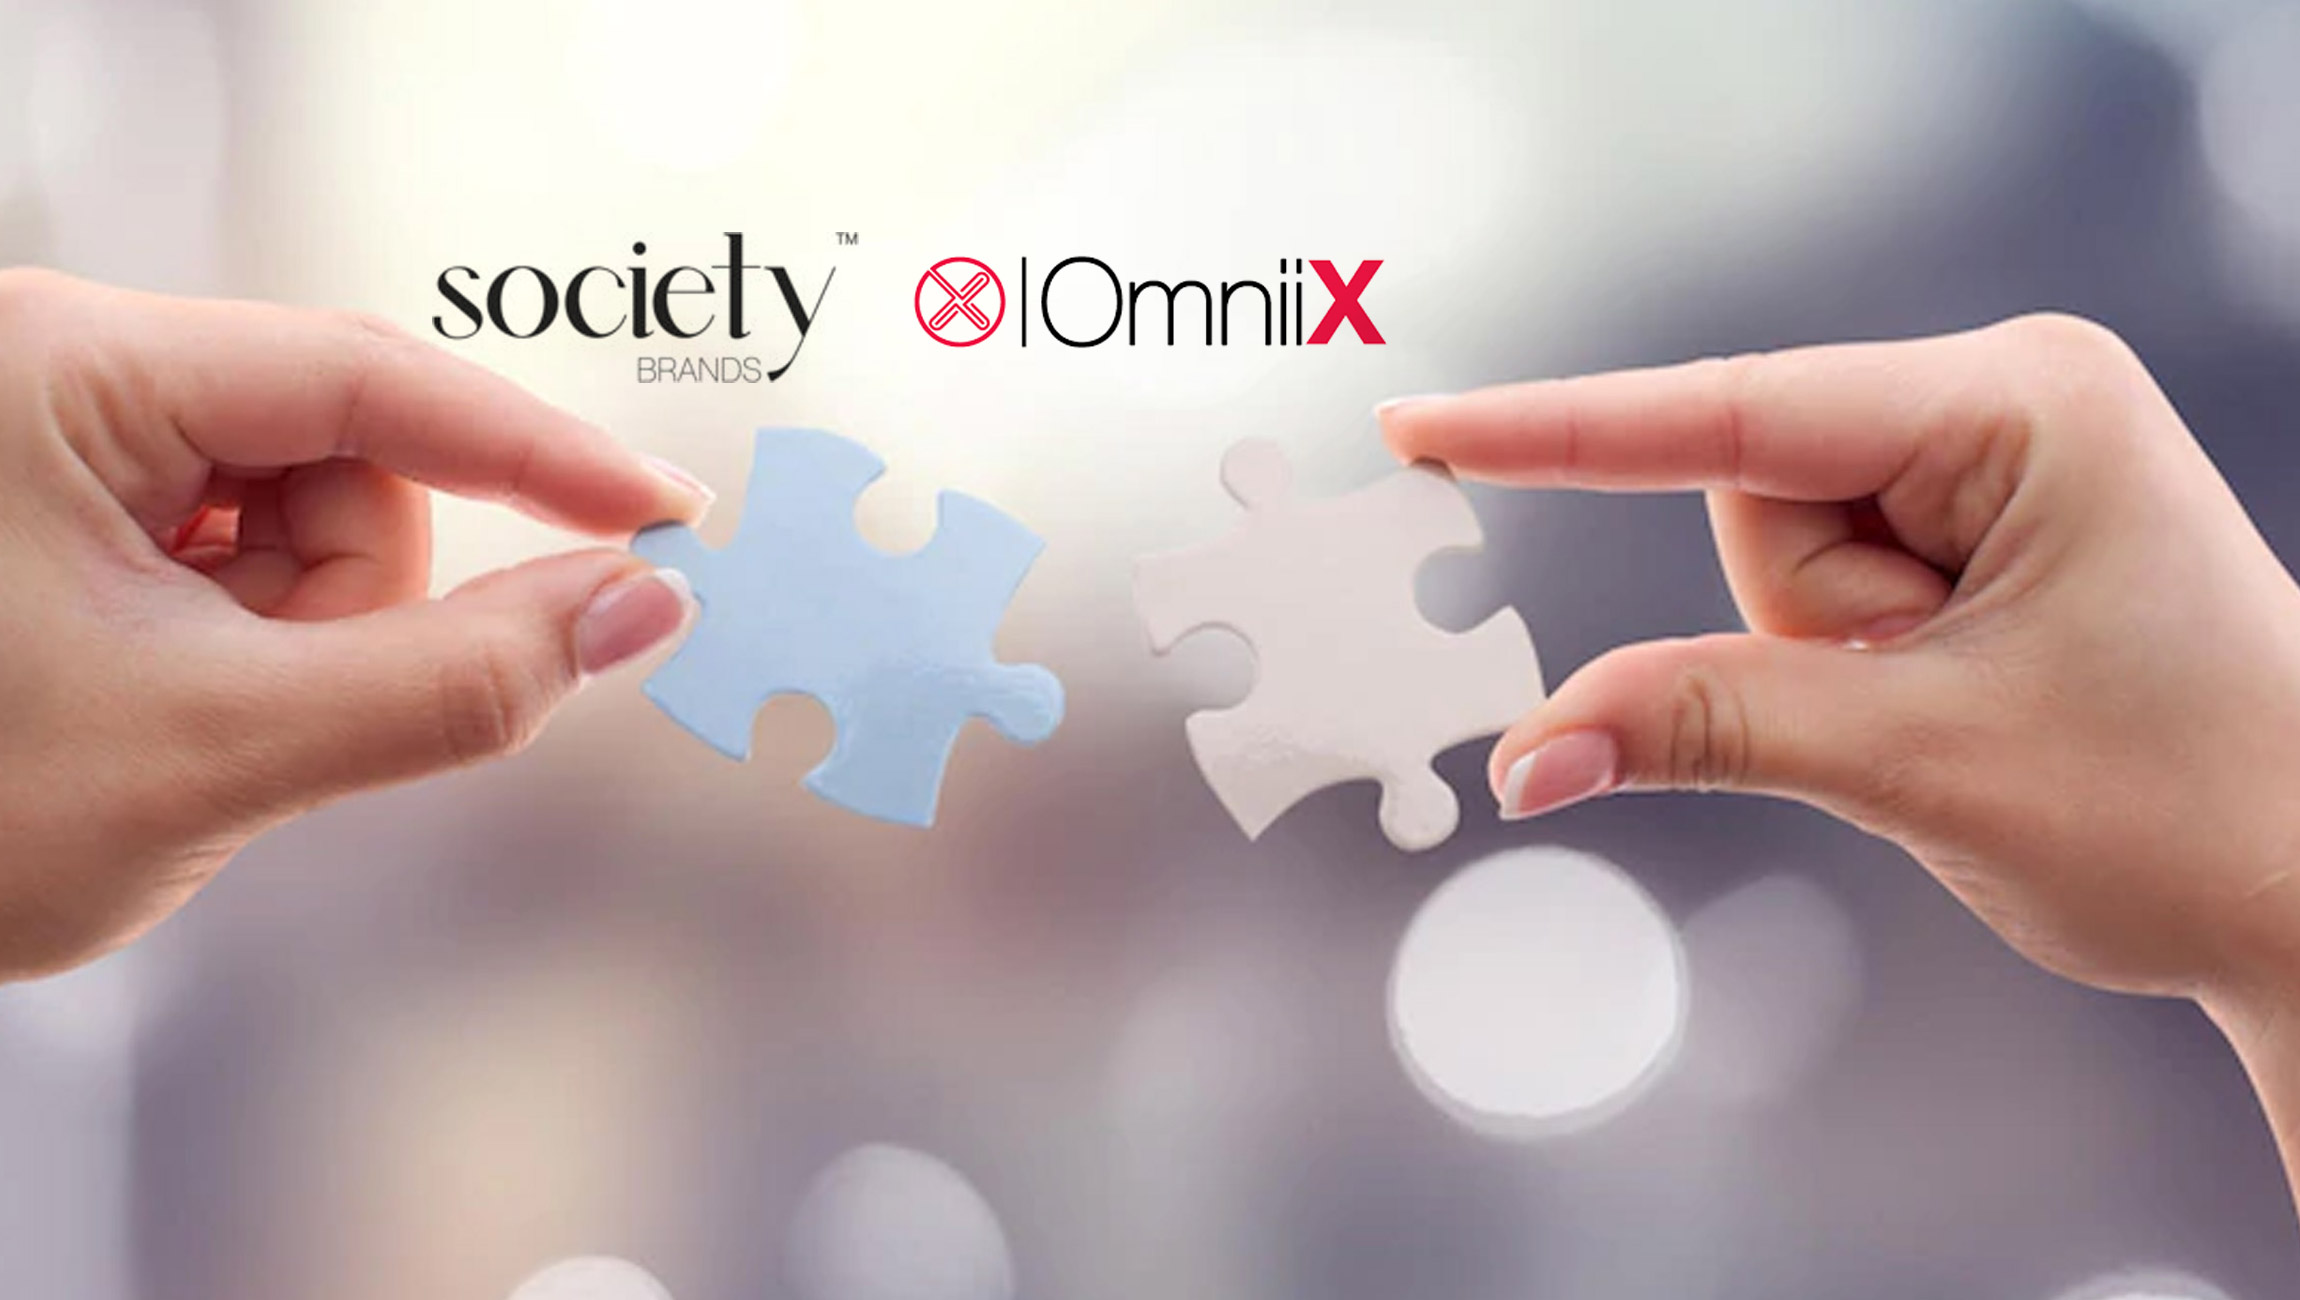 Amazon Aggregator Society Brands Acquires Brand Management Agency OmniiX to Accelerate Rapid Growth of Acquired Companies